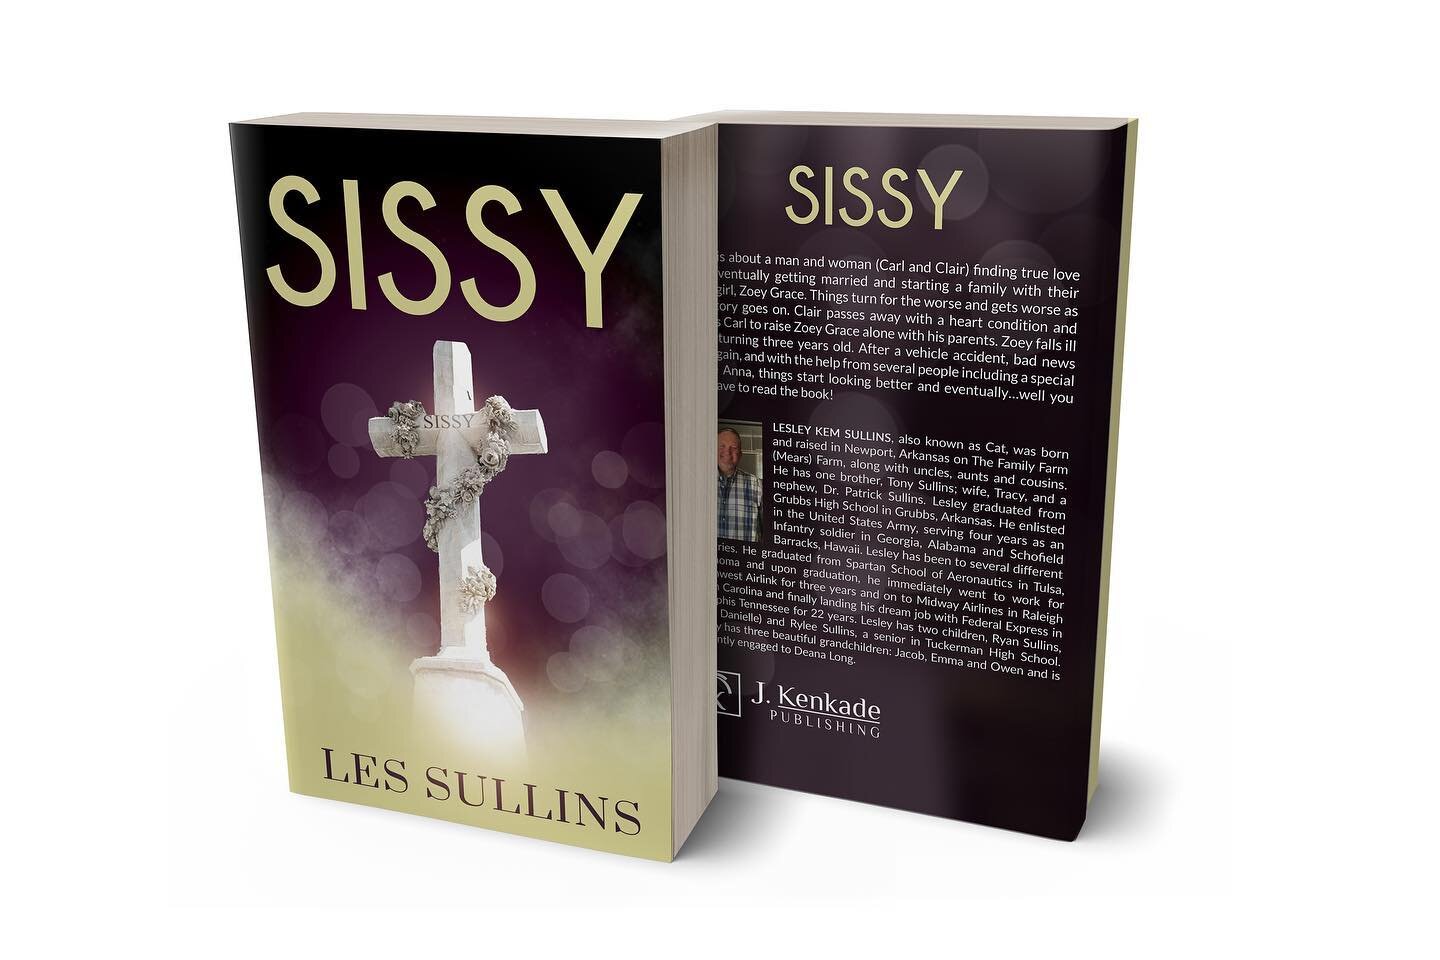 New Release! 🔥🔥🔥
Available in Hardcover, Paperback and eBook!

Congratulations to Author Les Sullins! 

Sissy is about a man and woman (Carl and Clair) finding true love and eventually getting married and starting a family with their baby girl, Zo